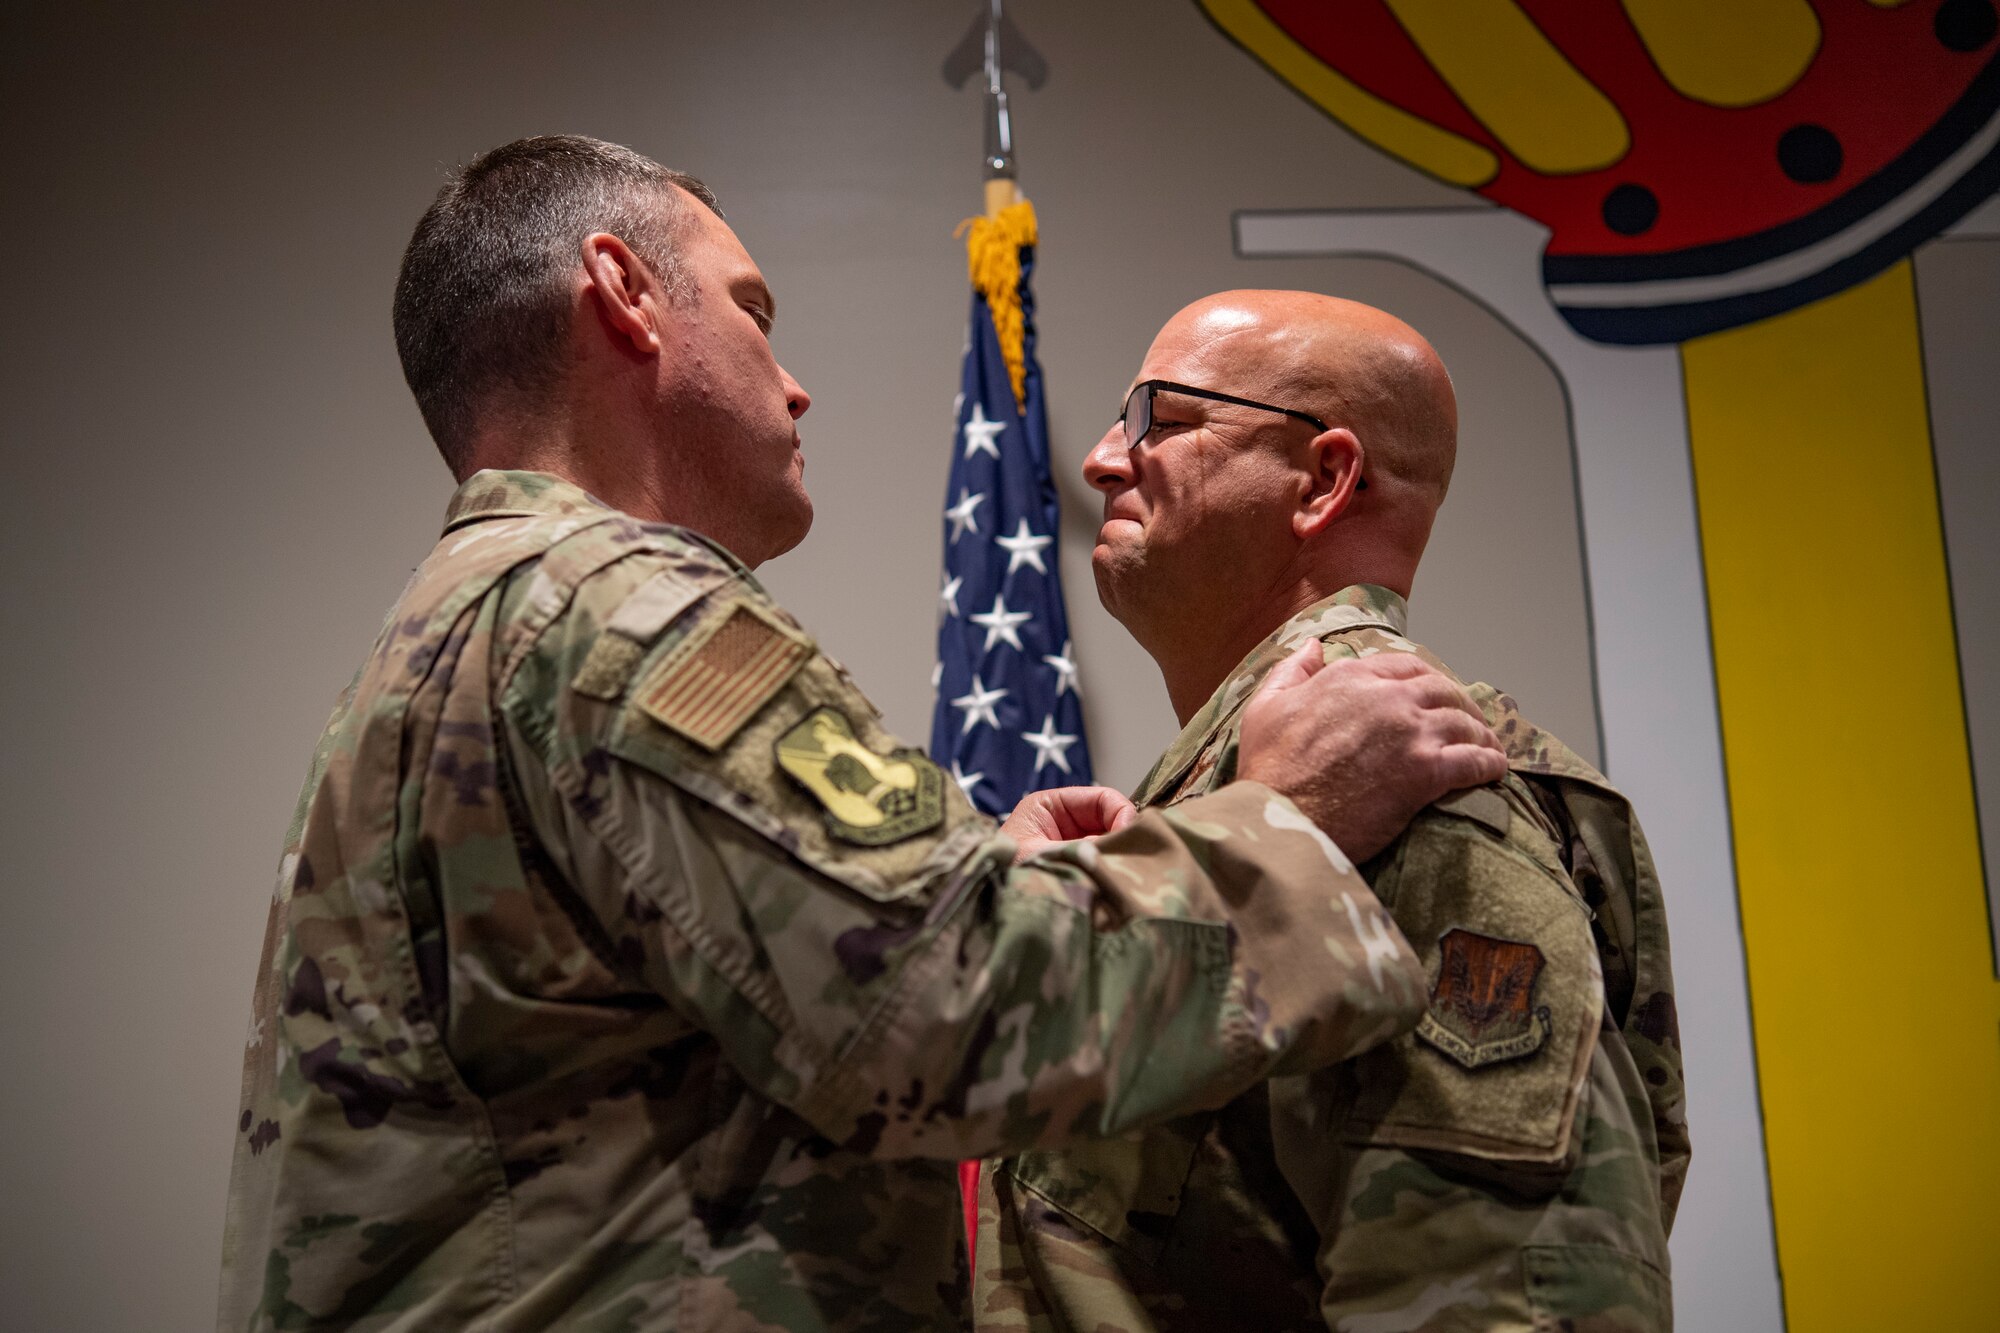 U.S. Air Force Col. Chris Richardson, 347th Rescue Group commander, congratulates Senior Master Sgt. Brandon Bitler, 71st Rescue Squadron, during an awards ceremony at Moody Air Force Base, Georgia, May 31, 2022. During the ceremony, Moody leadership presented three Bronze Star Medals, 12 single event Air Medals and more than 18 Air Force Commendation Medals with combat devices, and 21 Afghanistan Campaign and Humanitarian Service Medals to the Flying Tigers in attendance. (U.S. Air Force photo by Andrea Jenkins)